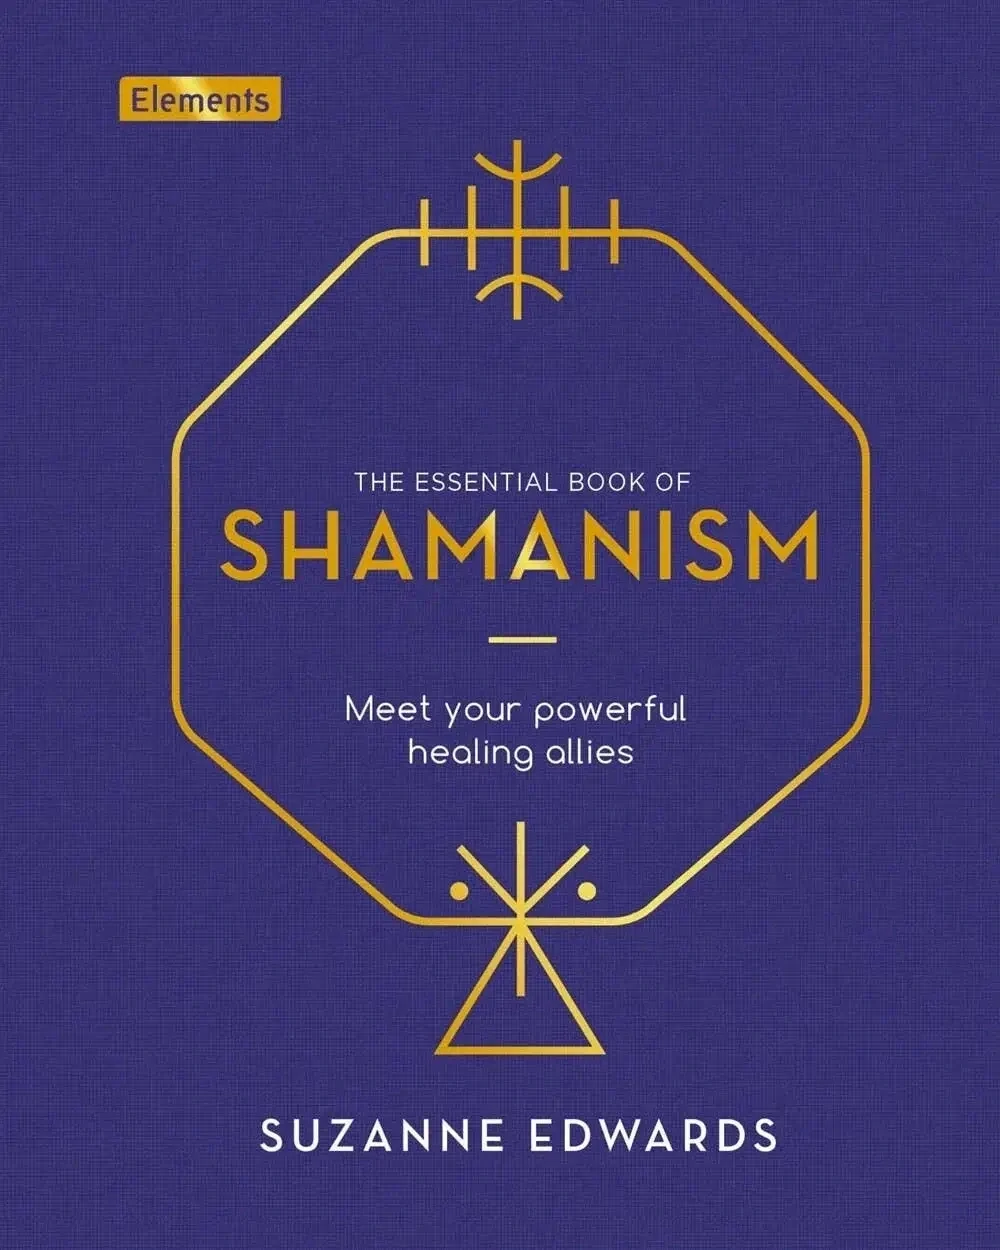 The Essential Book of Shamanism by Suzanne Edwards